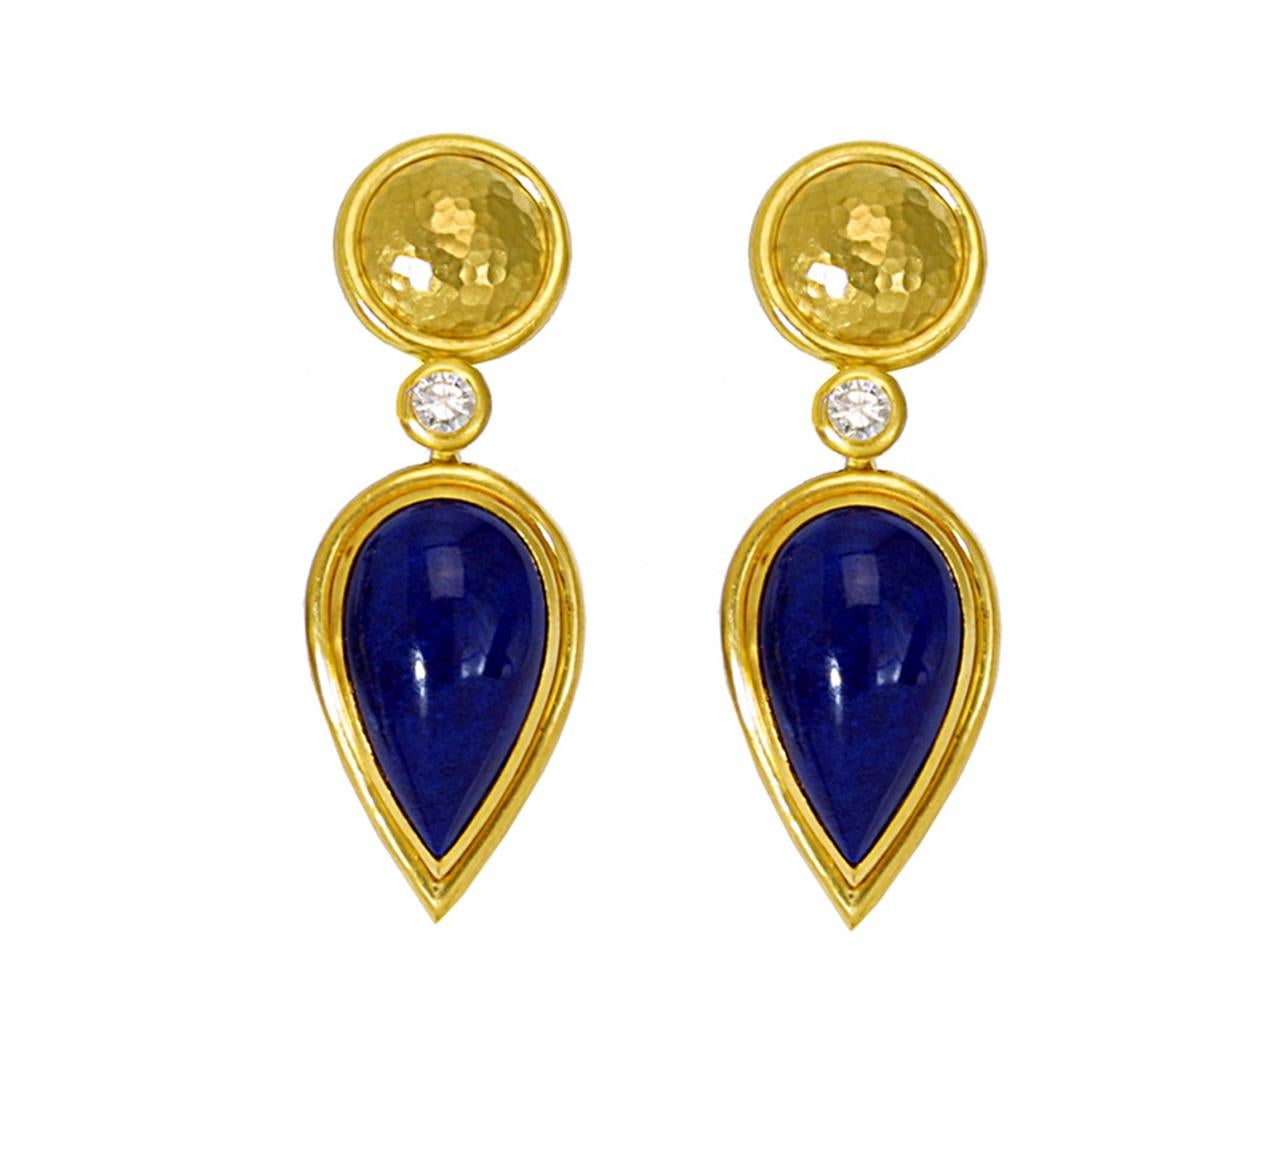 A pair of handmade drop earrings in 22 carat hammered yellow gold with wonderful Lapis Lazulis and 2 diamonds 0,7 ct. They look very elegant and eye catching. Wear them to a spectacular event, or just when you want to feel glamorous.